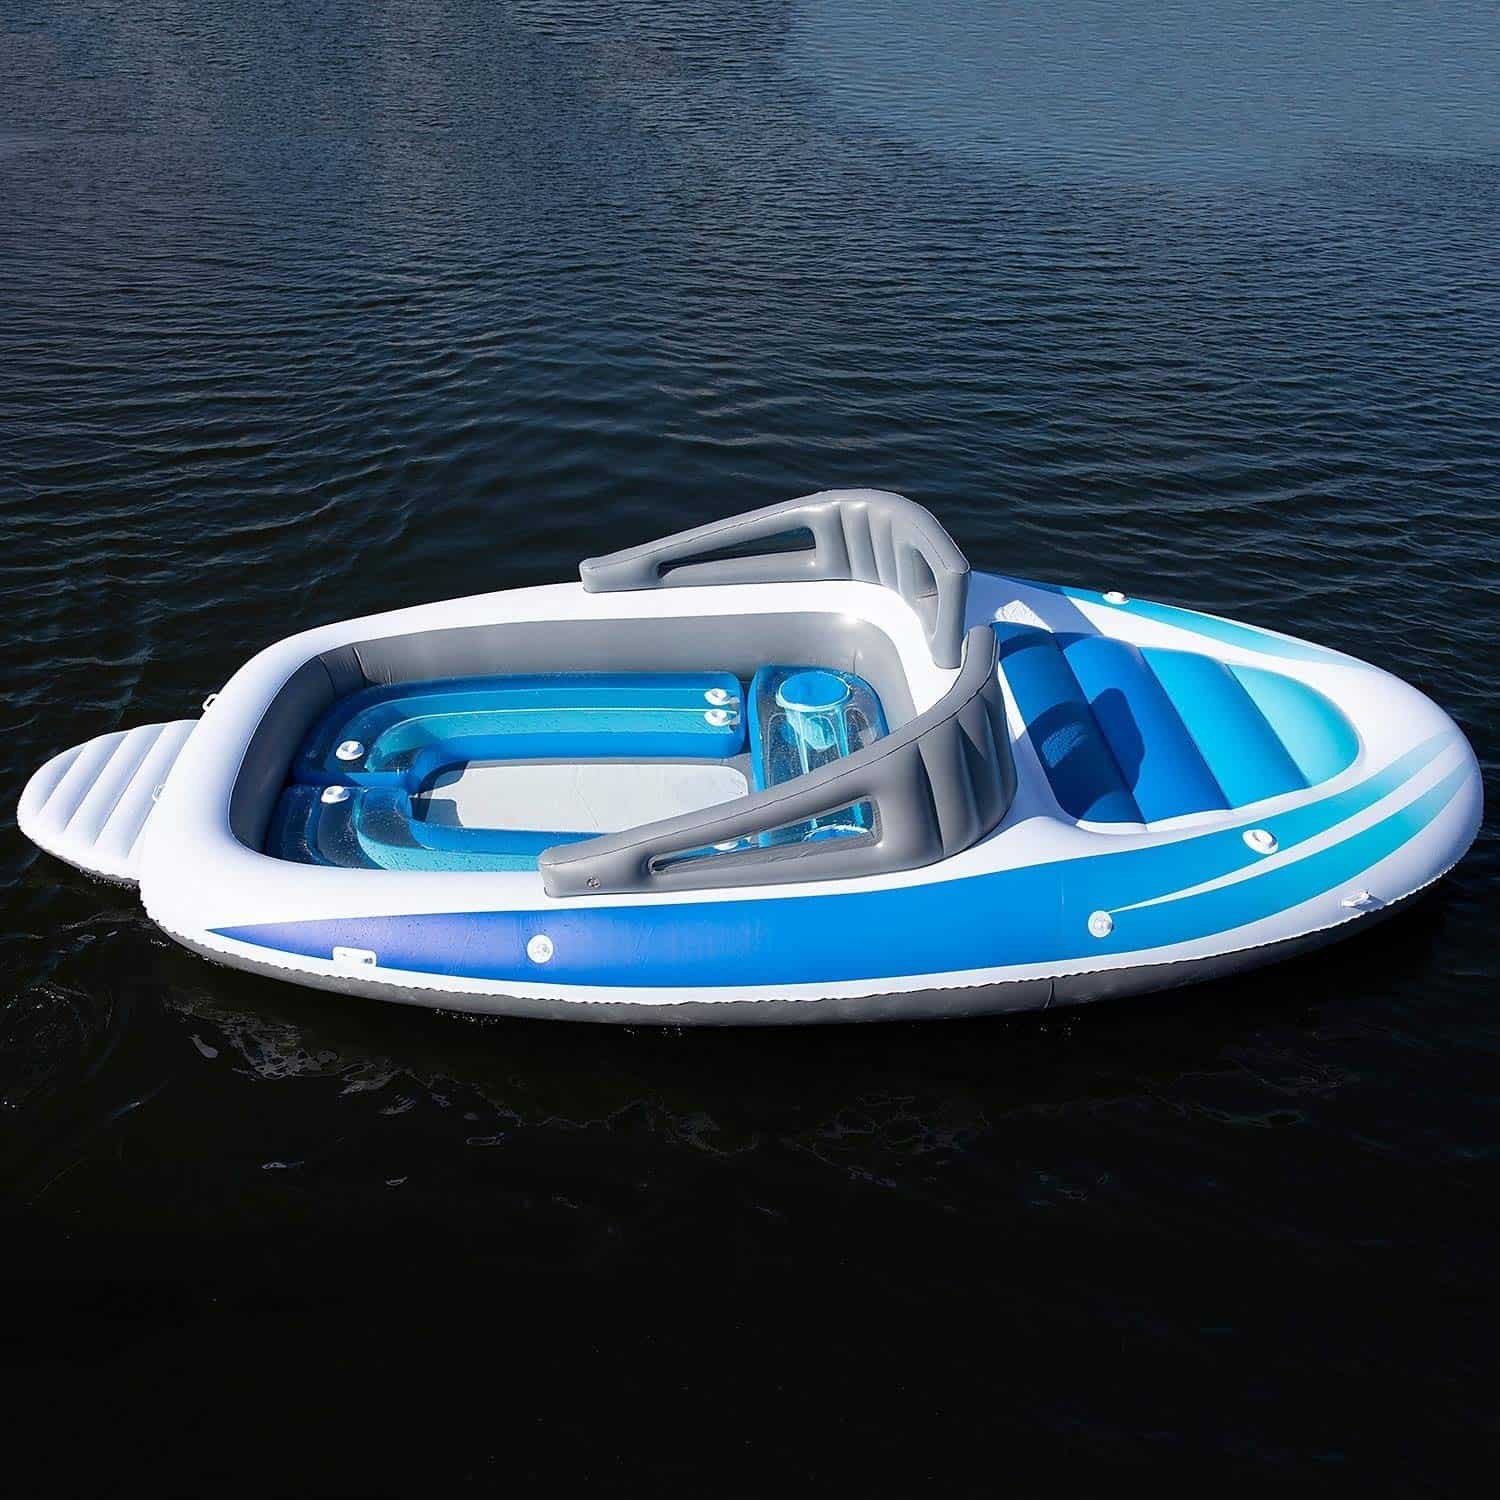 Inflatable Bay Breeze Boat